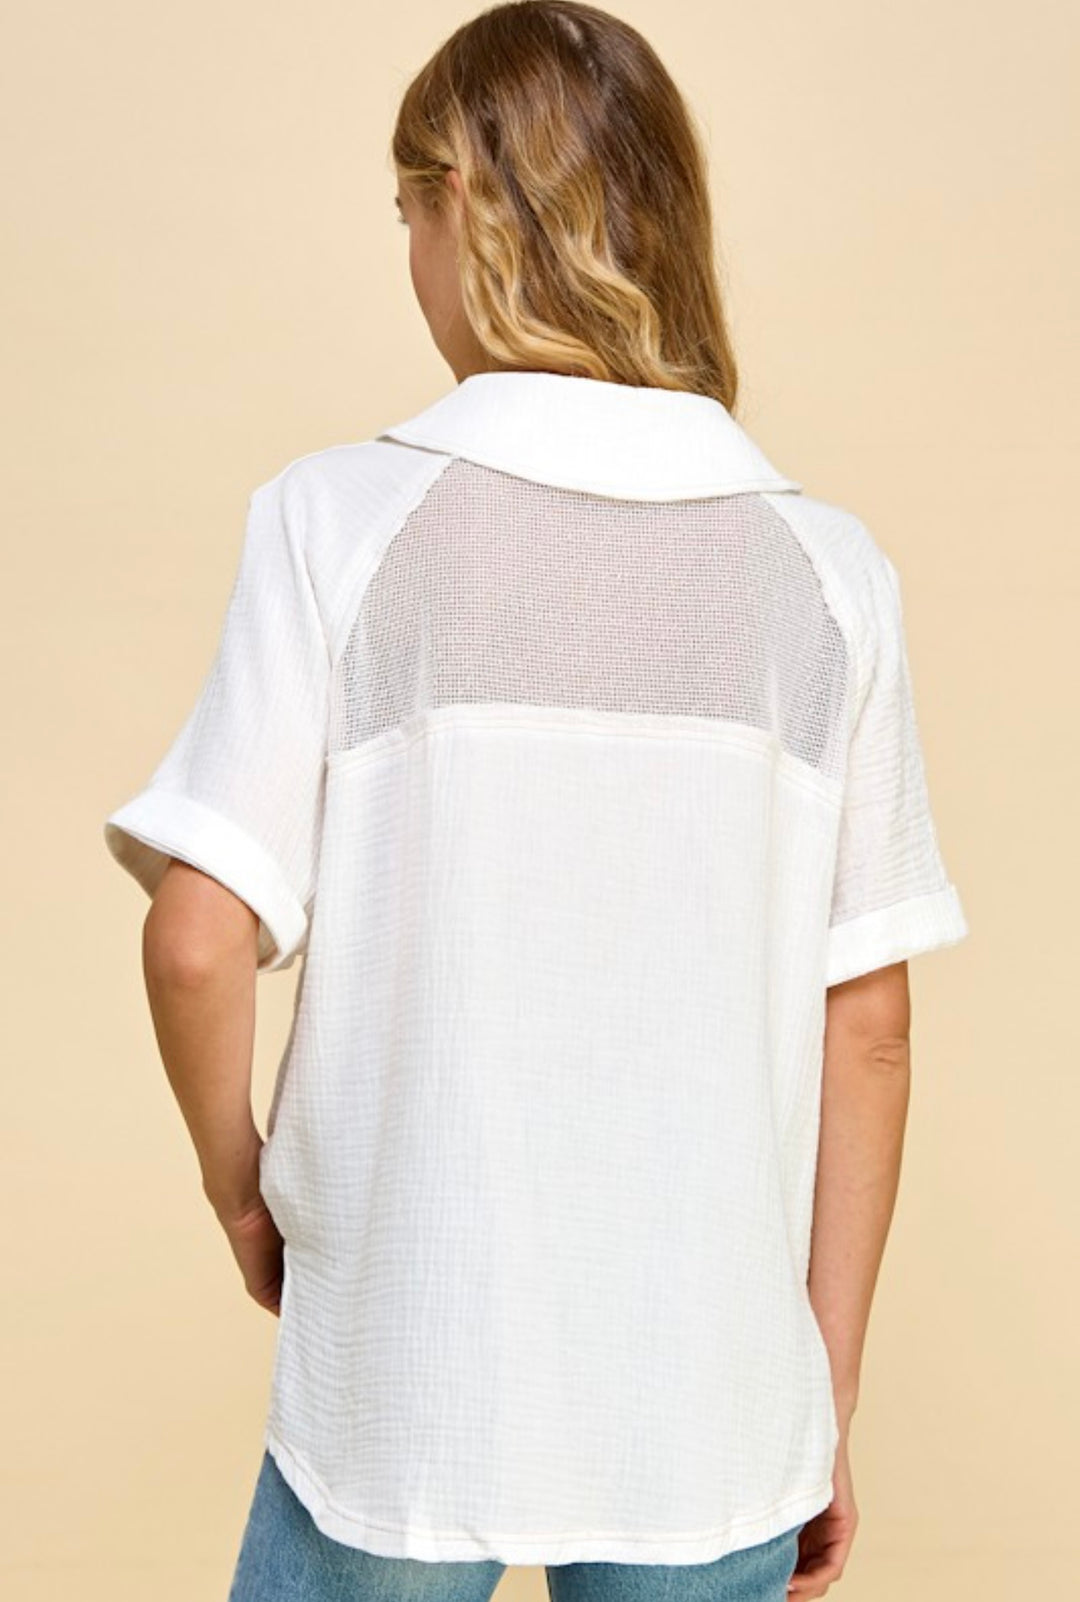 Netted Yoke Button up Shirt Off White